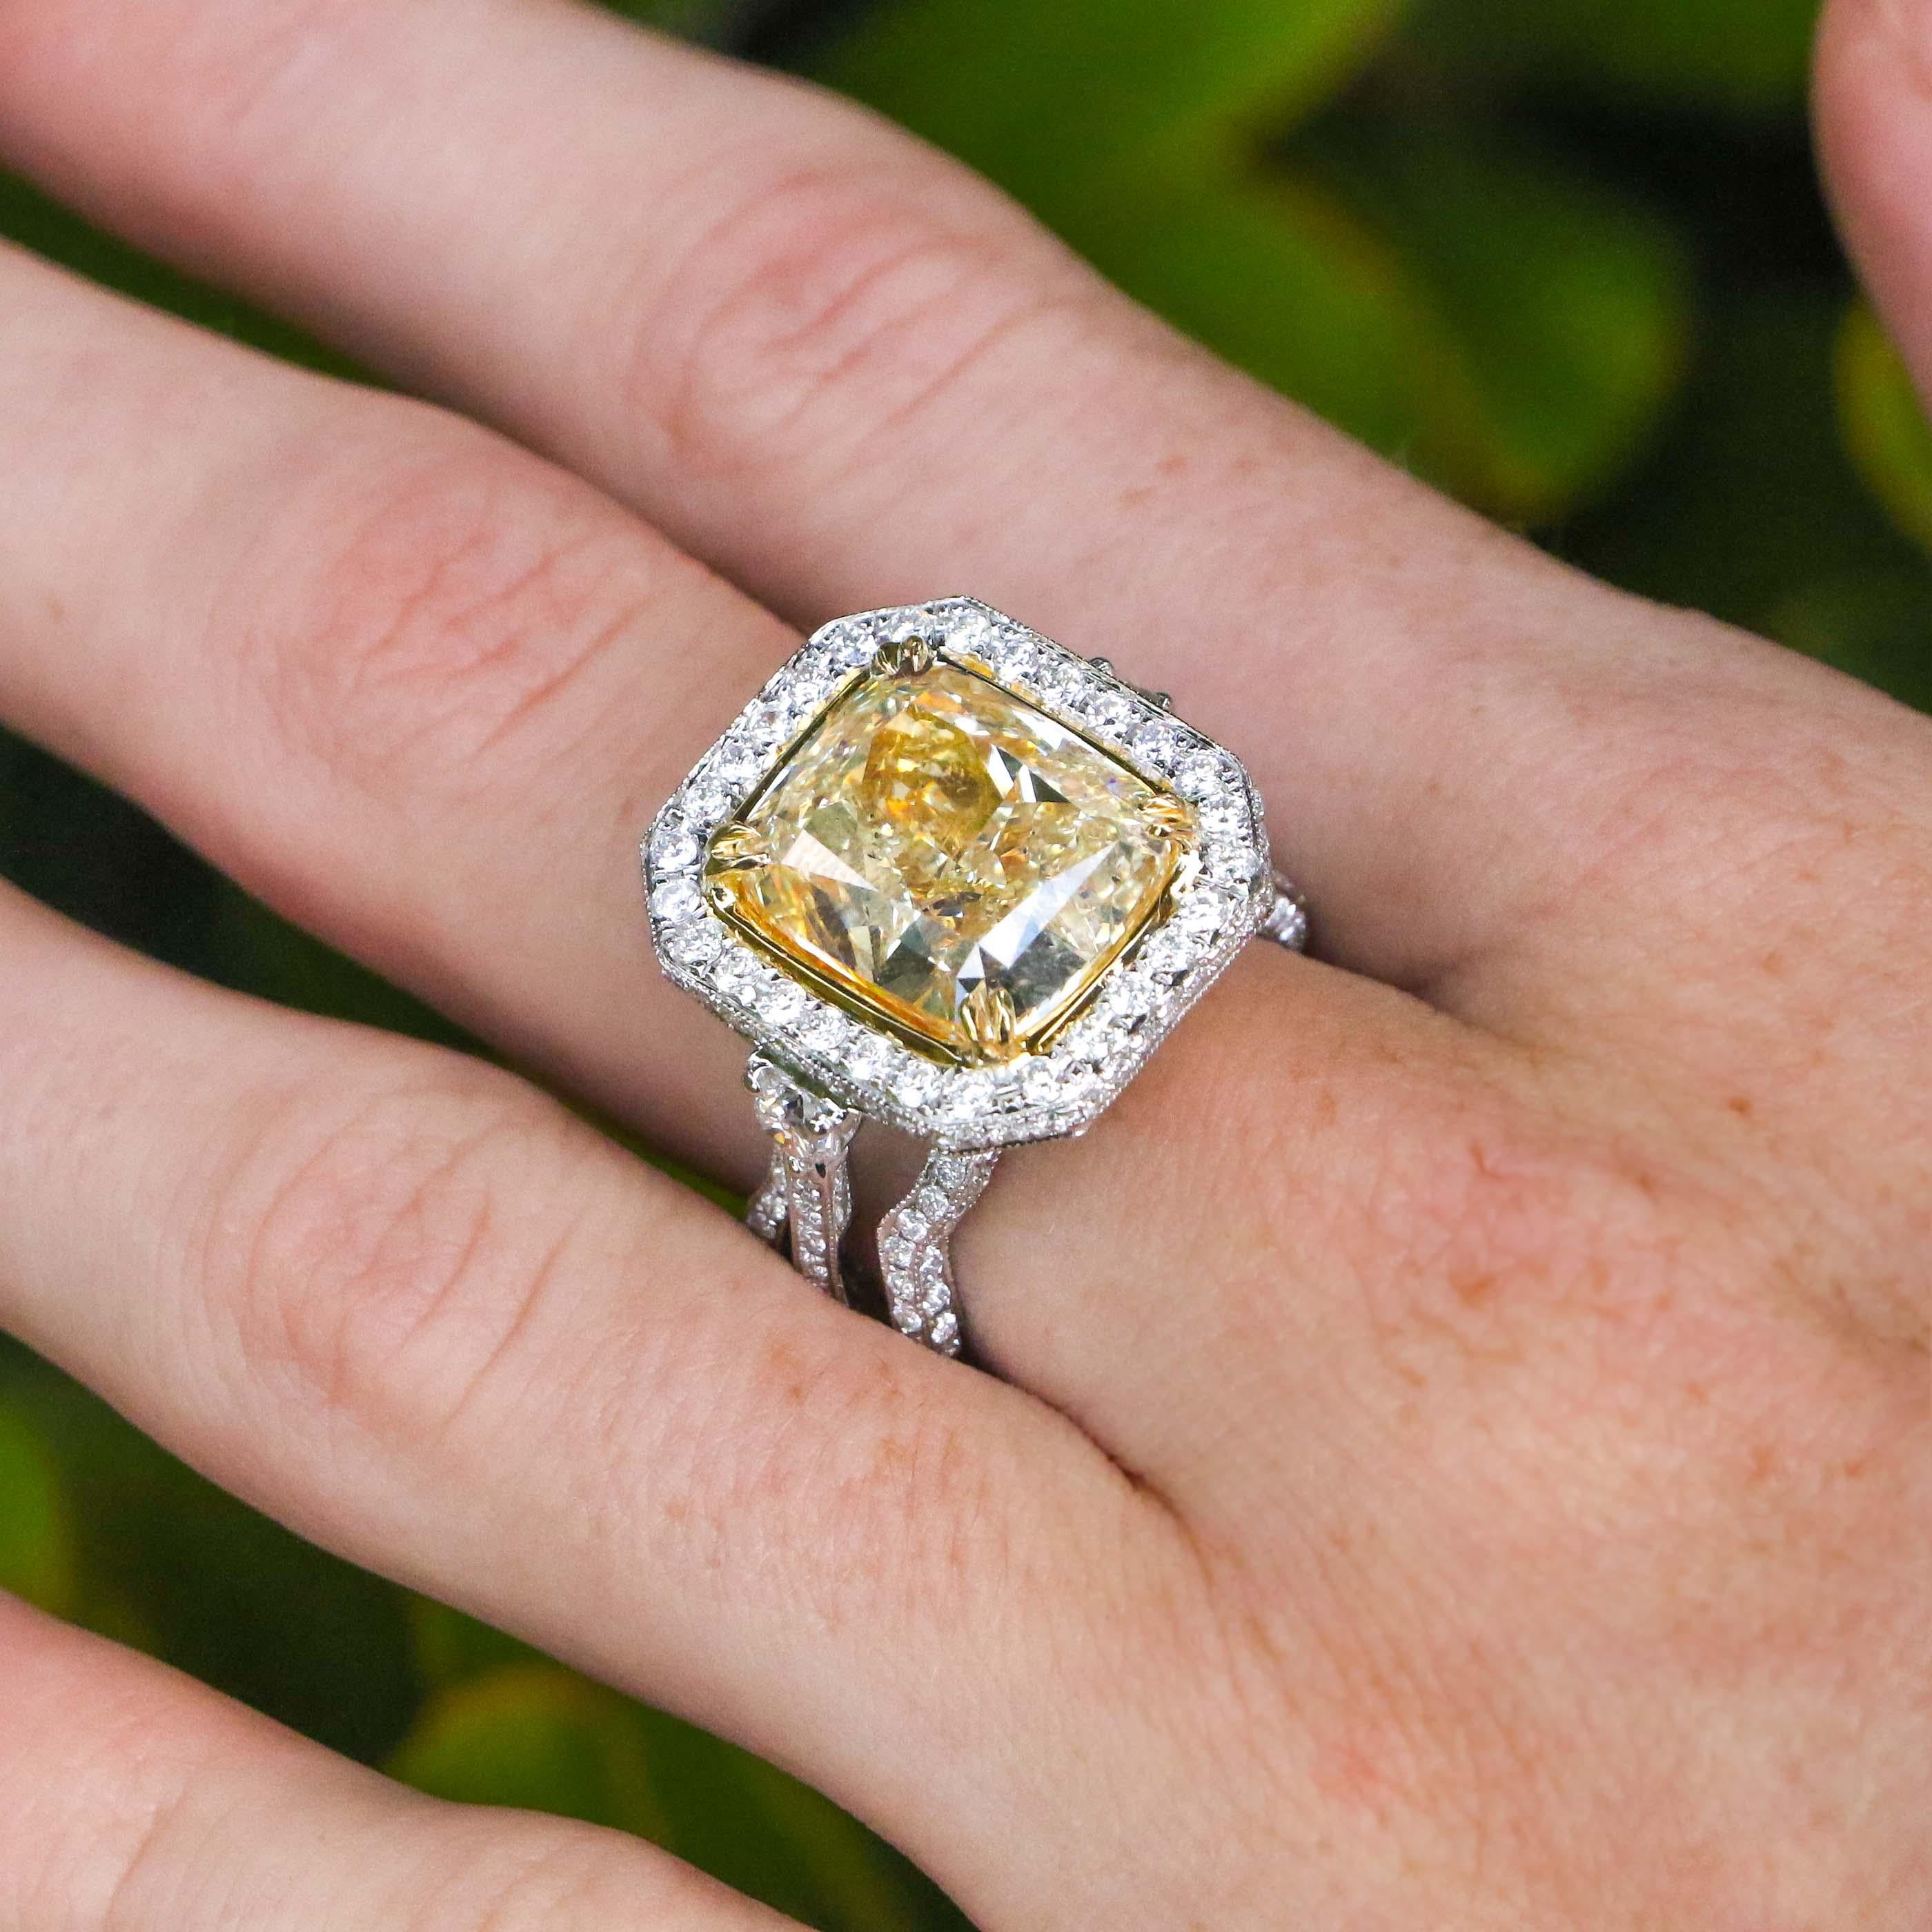 This ring boldly displays a stunning 10.12-carat canary diamond at its center crowning an intricate diamond set band. The center diamond is surrounded by F color diamonds that lead into this ring's beautiful waving band.

• 10.12 Carat Canary